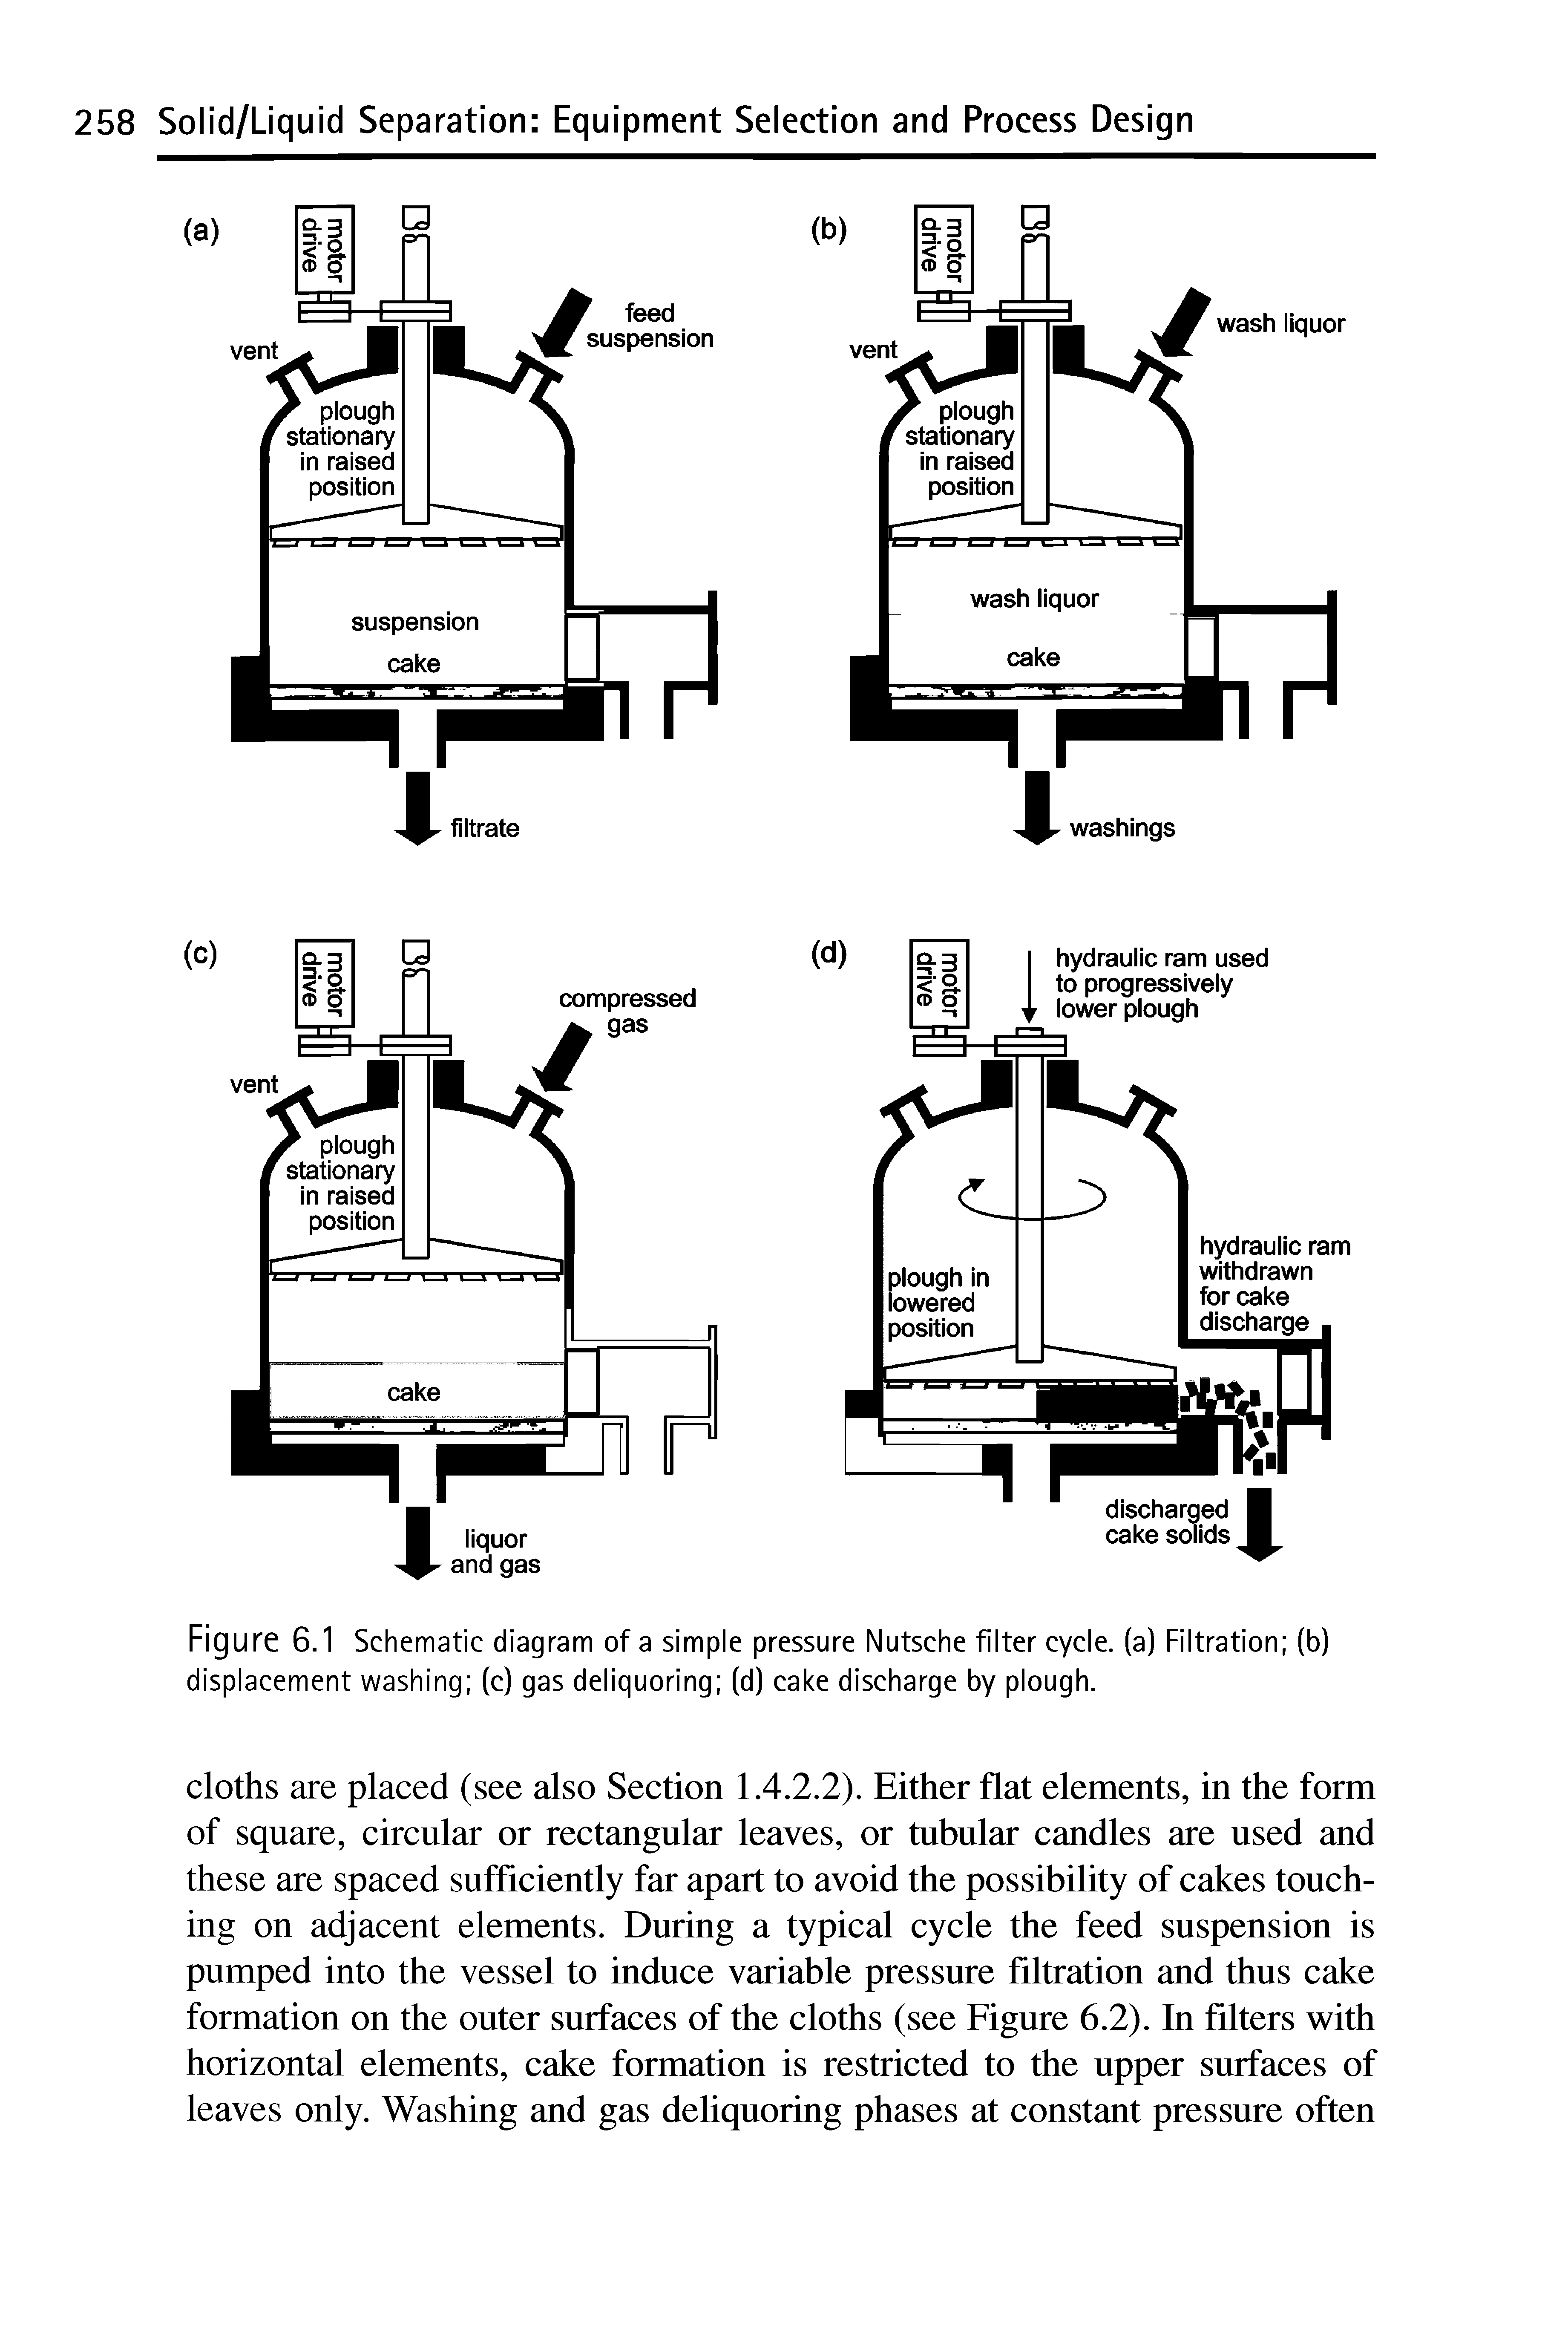 Figure 6.1 Schematic diagram of a simple pressure Nutsche filter cycle, (a) Filtration (b) displacement washing (c) gas deliquoring (d) cake discharge by plough.